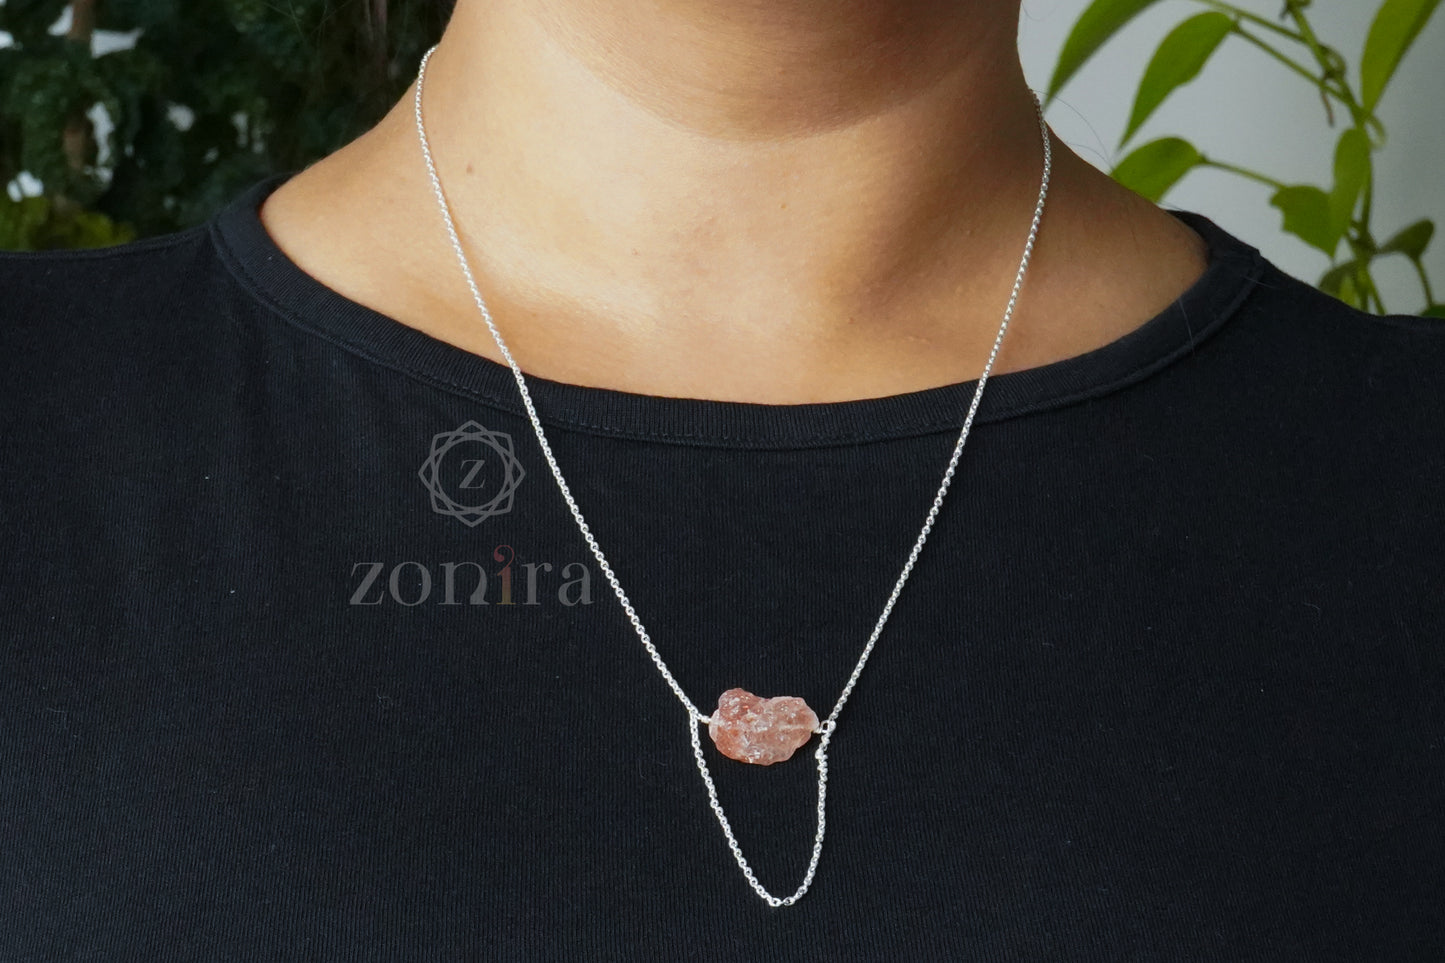 Aabis Silver Necklace - Raw Sunstone